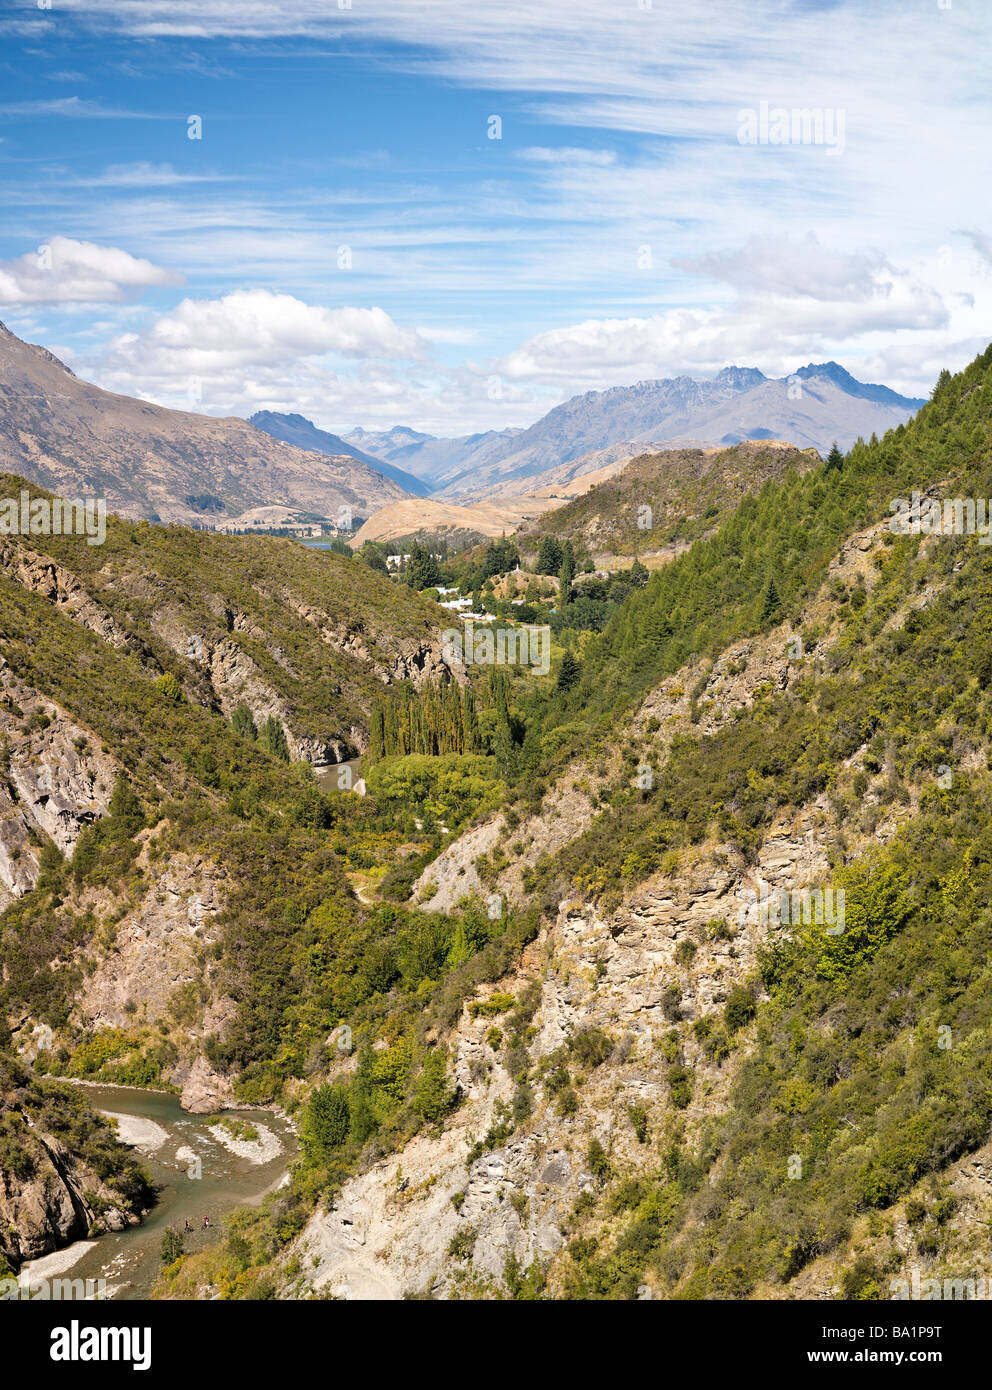 View towards Arrowtown, Lake Hayes and the Remarkables, New Zealand Stock Photo